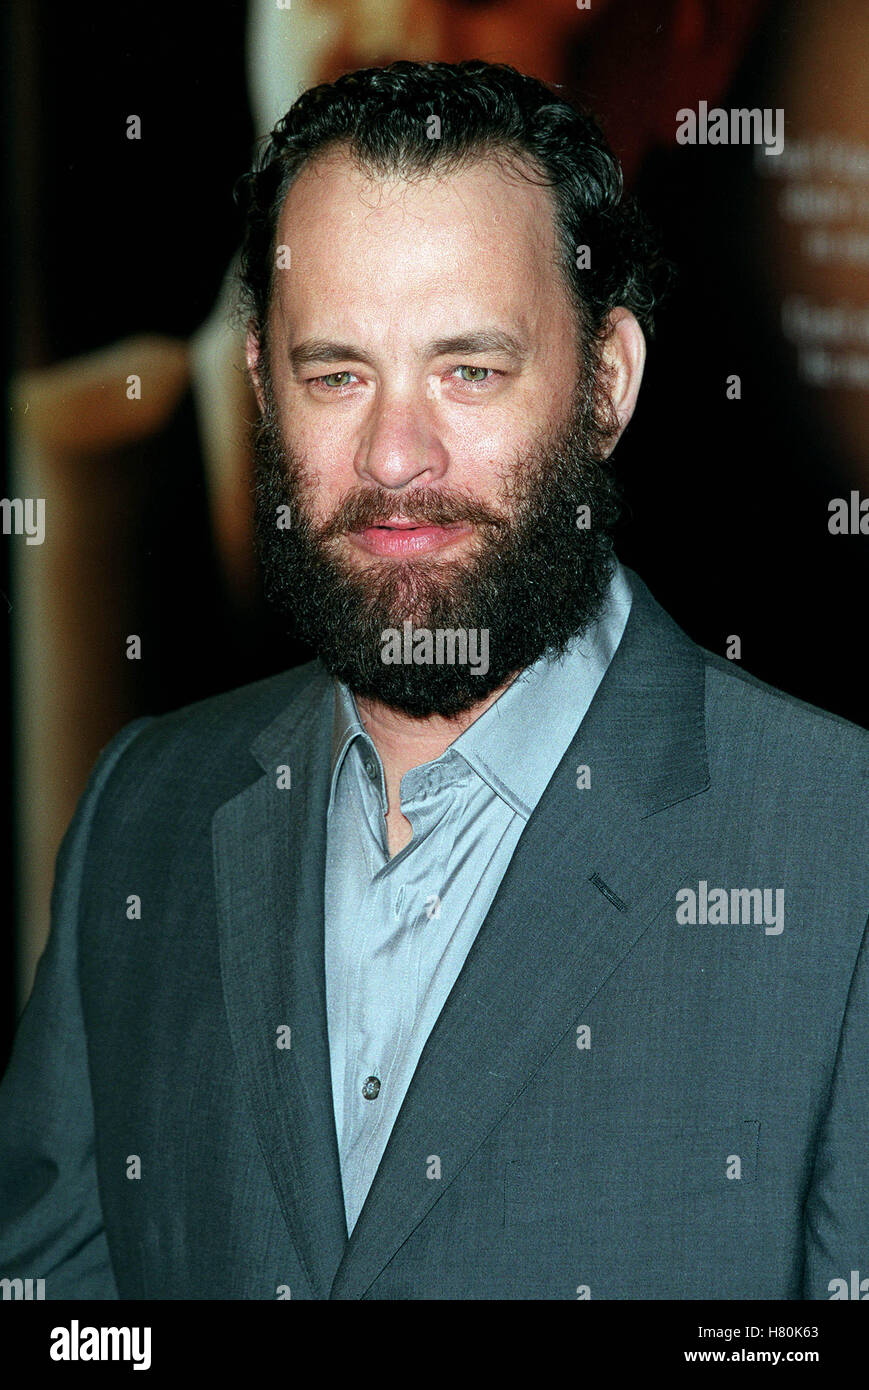 Tom Hanks High Resolution Stock Photography and Images - Alamy